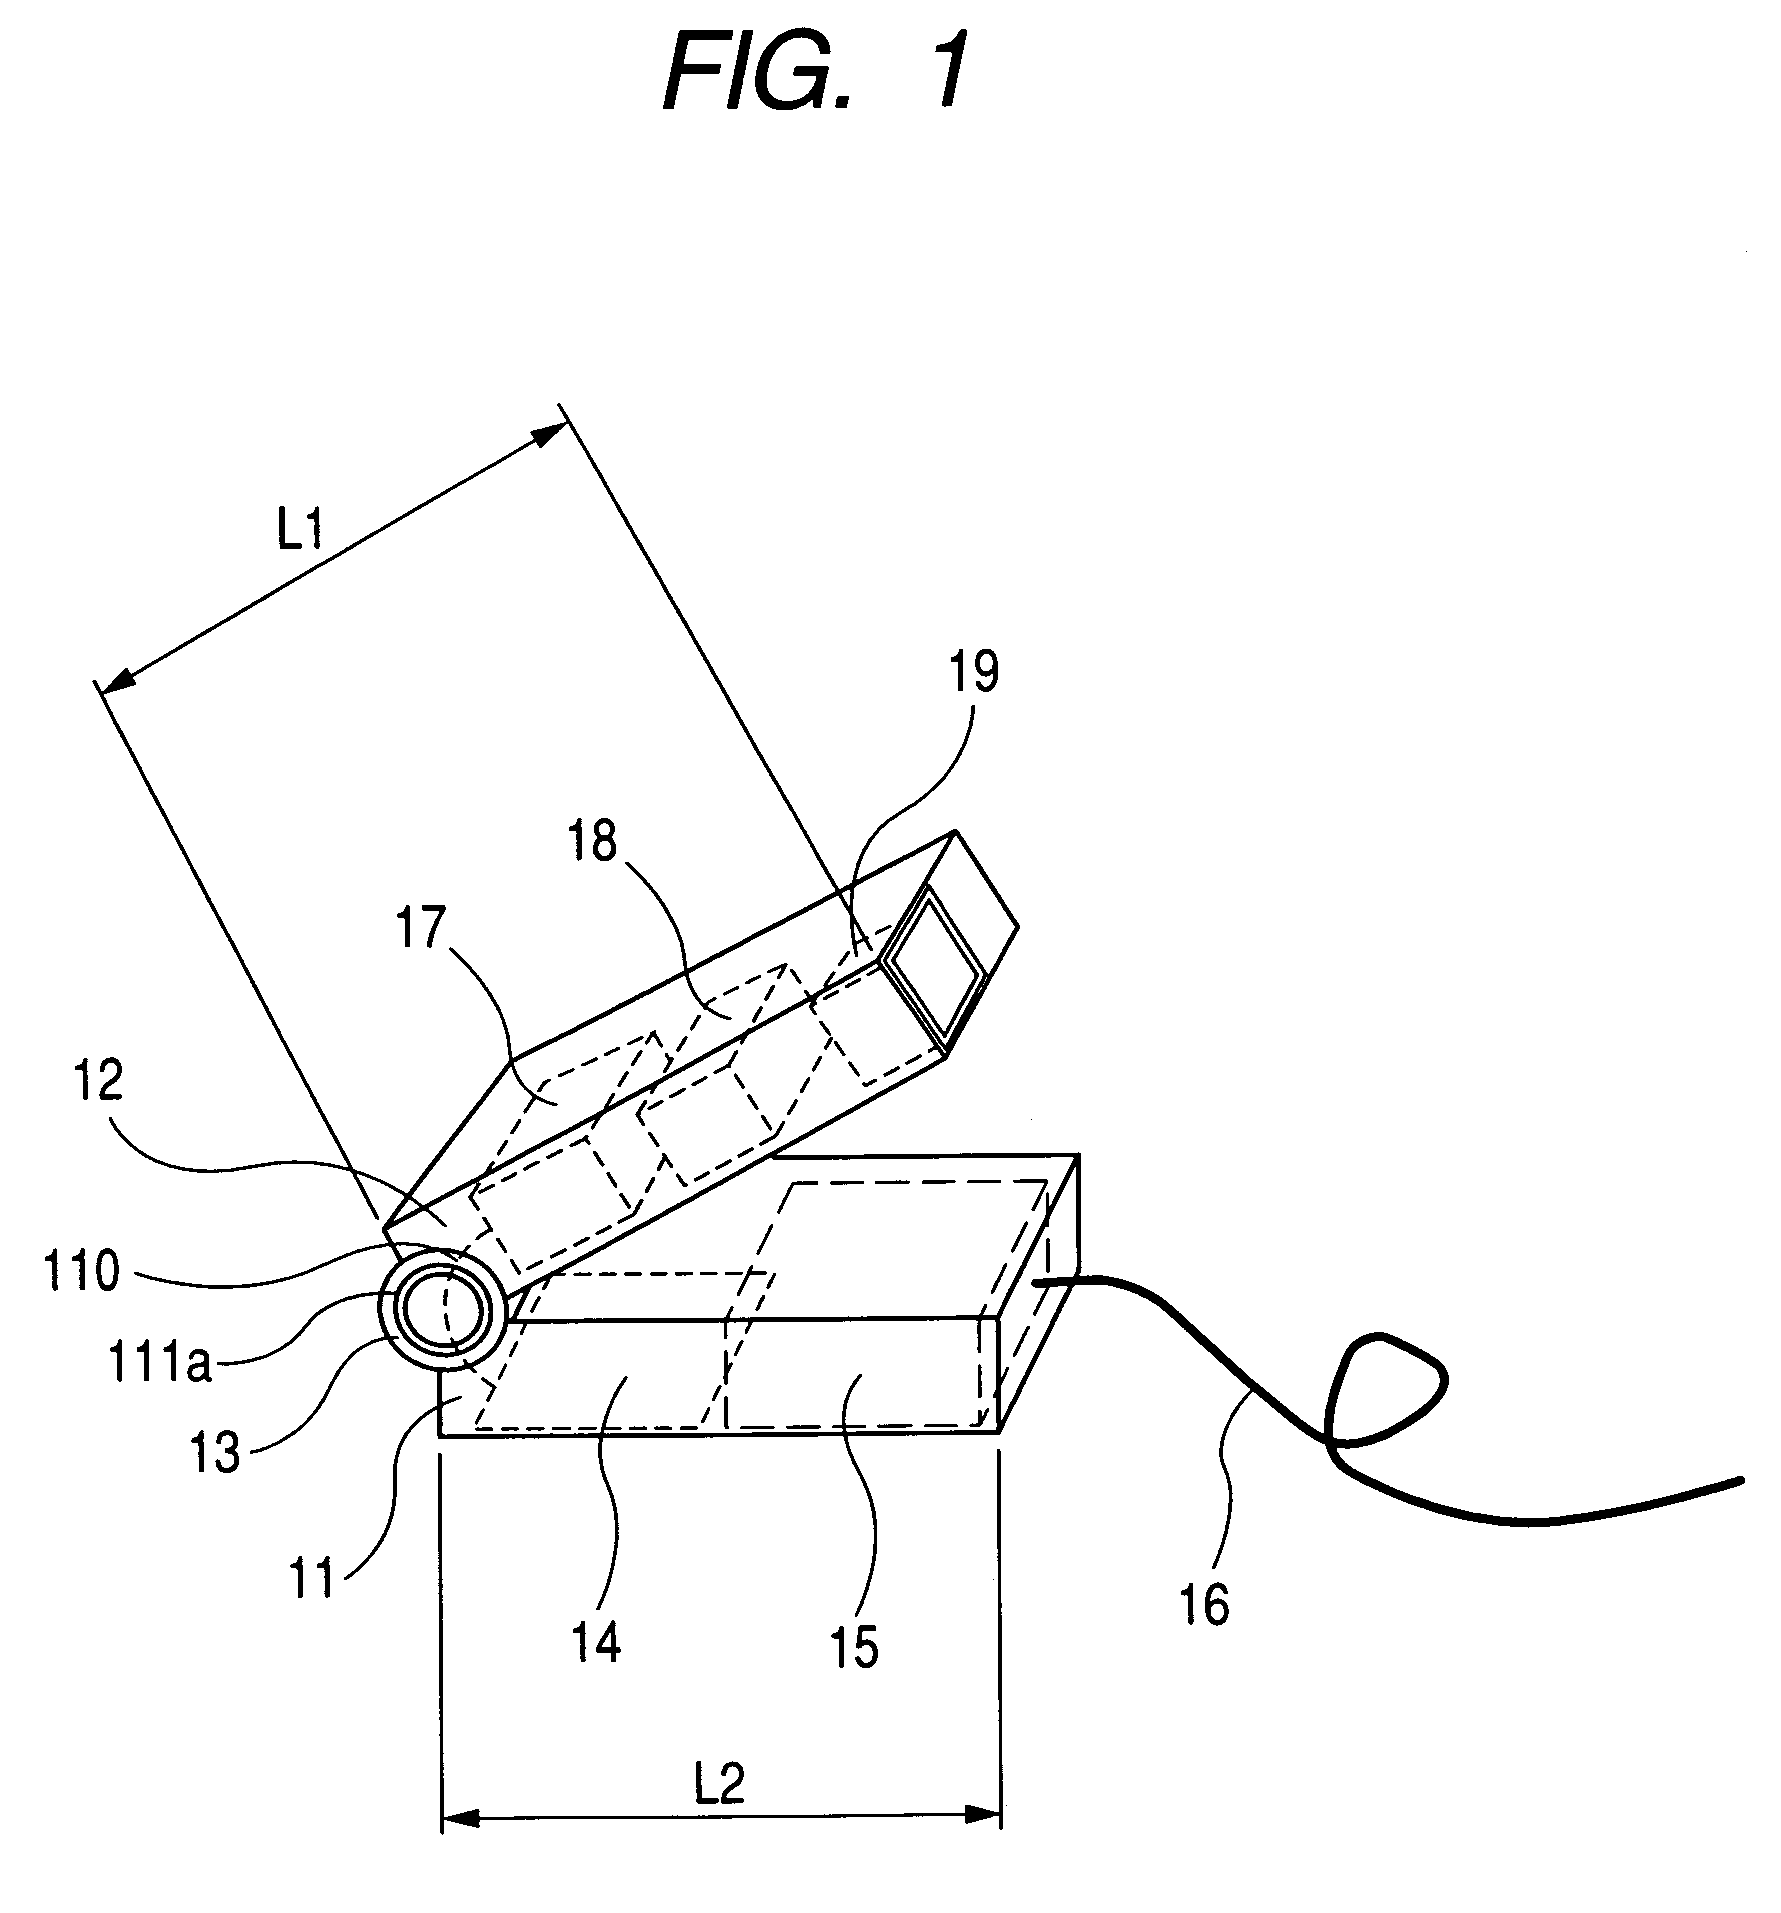 Video projection apparatus